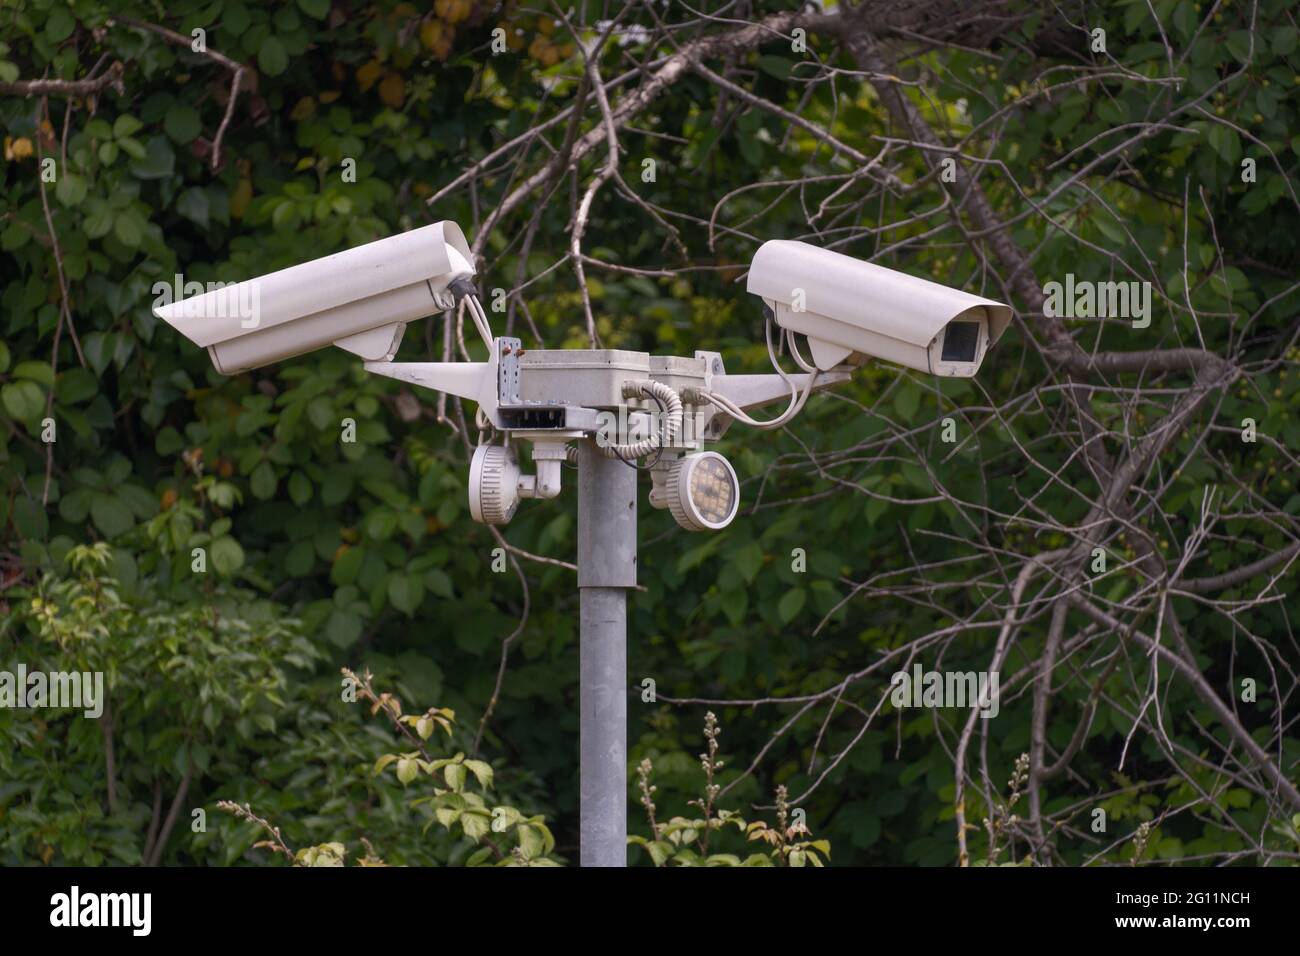 Security system in a public park in the city Stock Photo